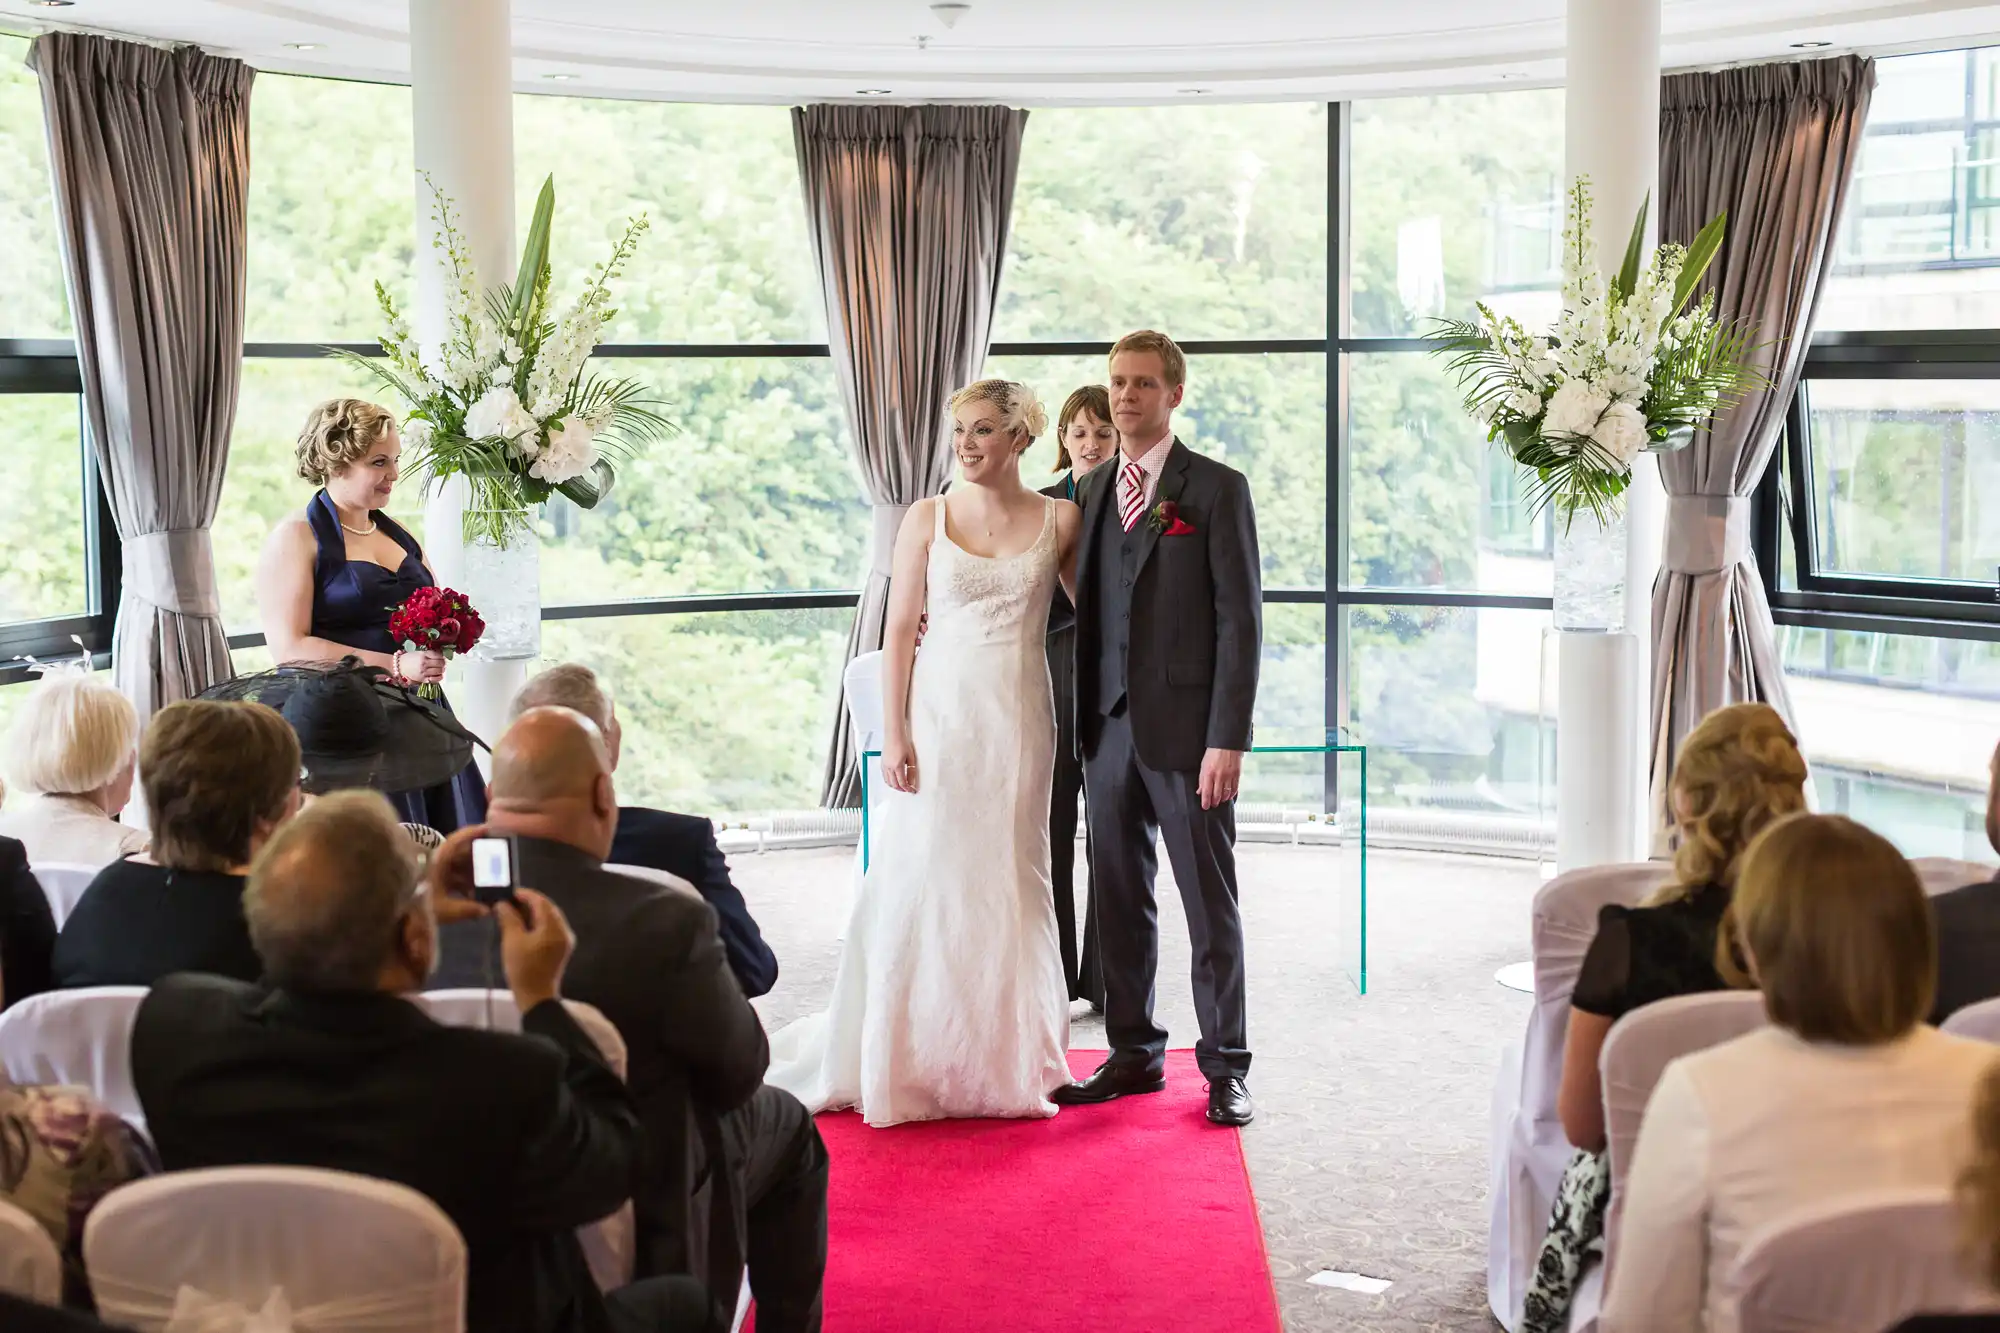 A bride and groom standing at the end of a red carpet in a wedding ceremony, with guests seated around them in a room with large windows and curtains.